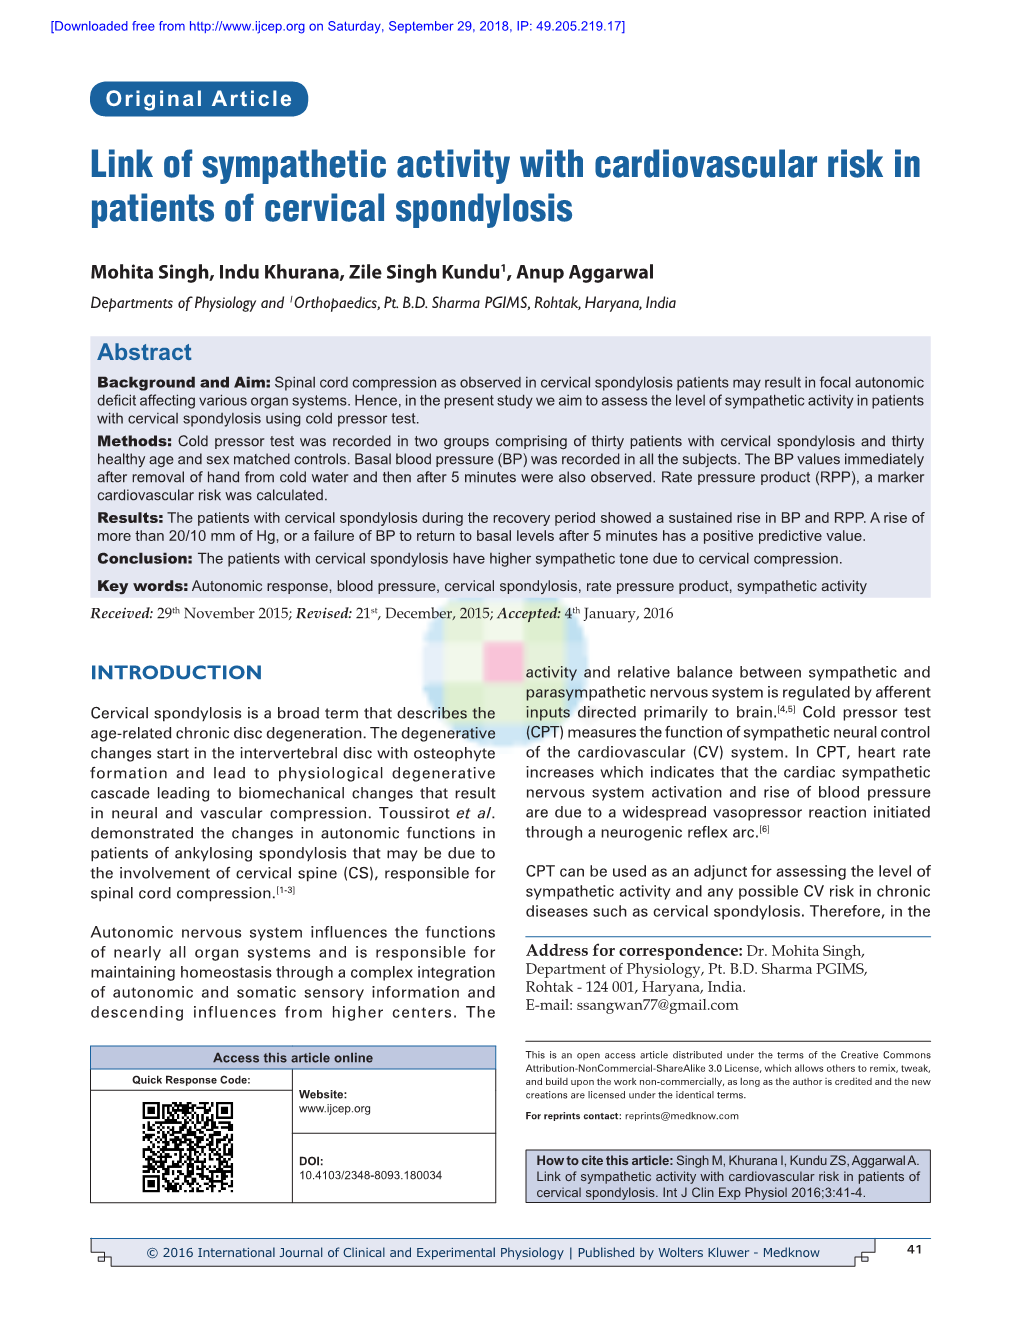 Link of Sympathetic Activity with Cardiovascular Risk in Patients of Cervical Spondylosis